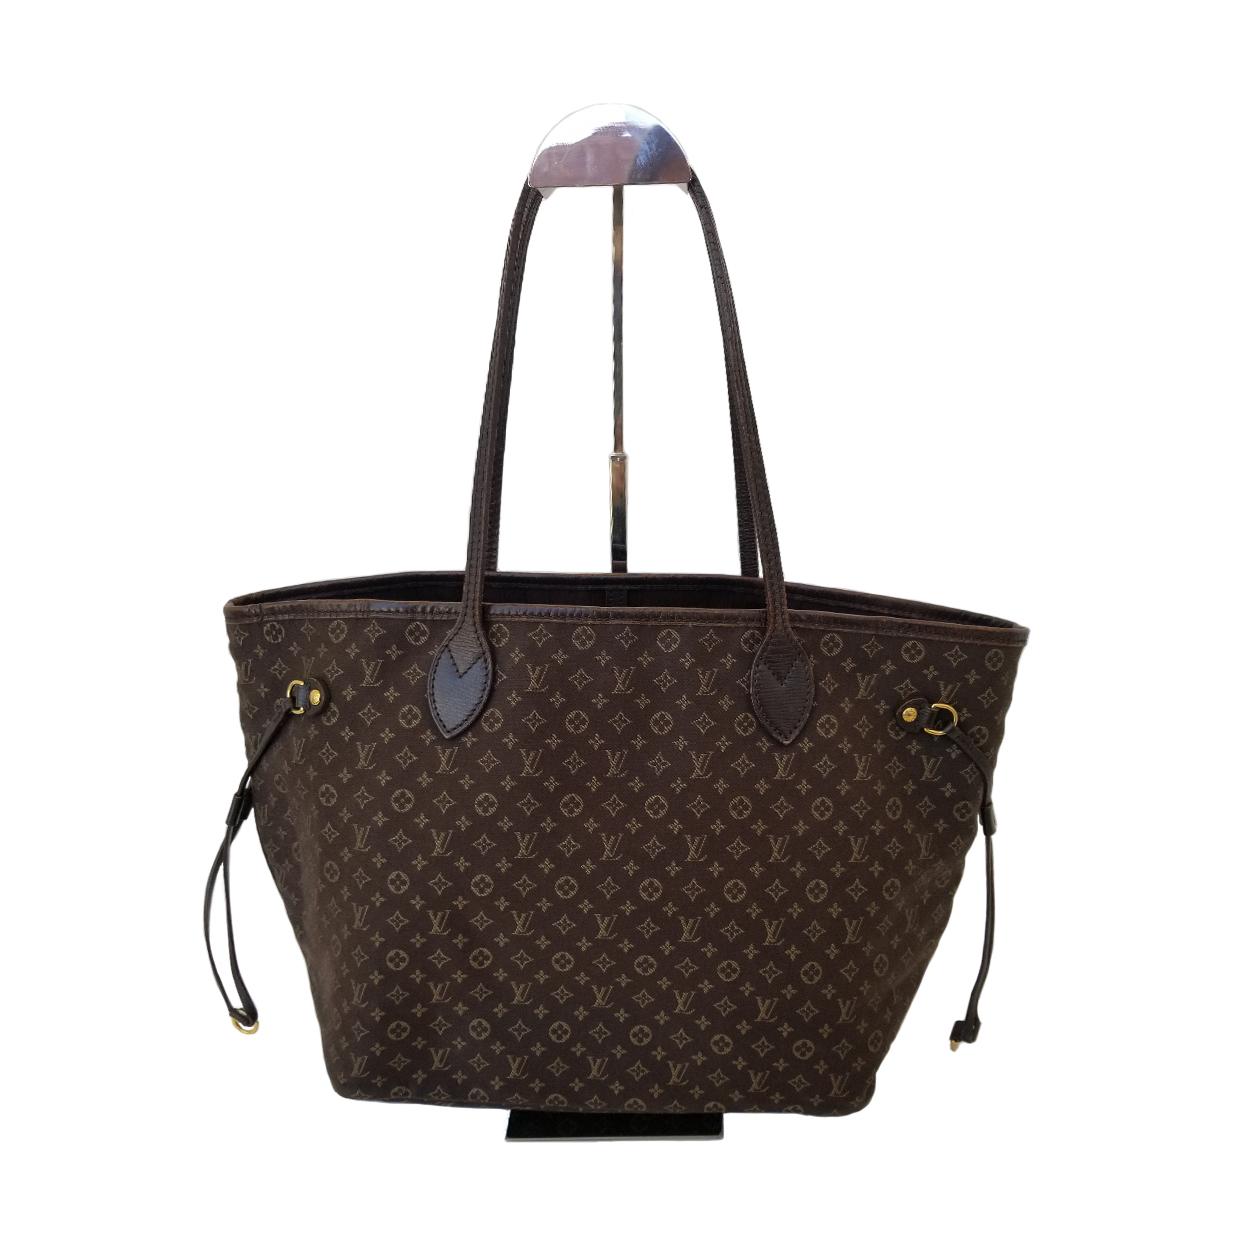 Brand - Louis Vuitton
Collection - Neverfull MM
Estimated Retail - $1,200.00
Style - Tote
Material - Canvas
Color - Brown
Pattern - Monogram Idylle
Closure - Hook & Loop
Hardware Material - Goldtone
Model/Date Code - CA3192
Size - Large
Feature -